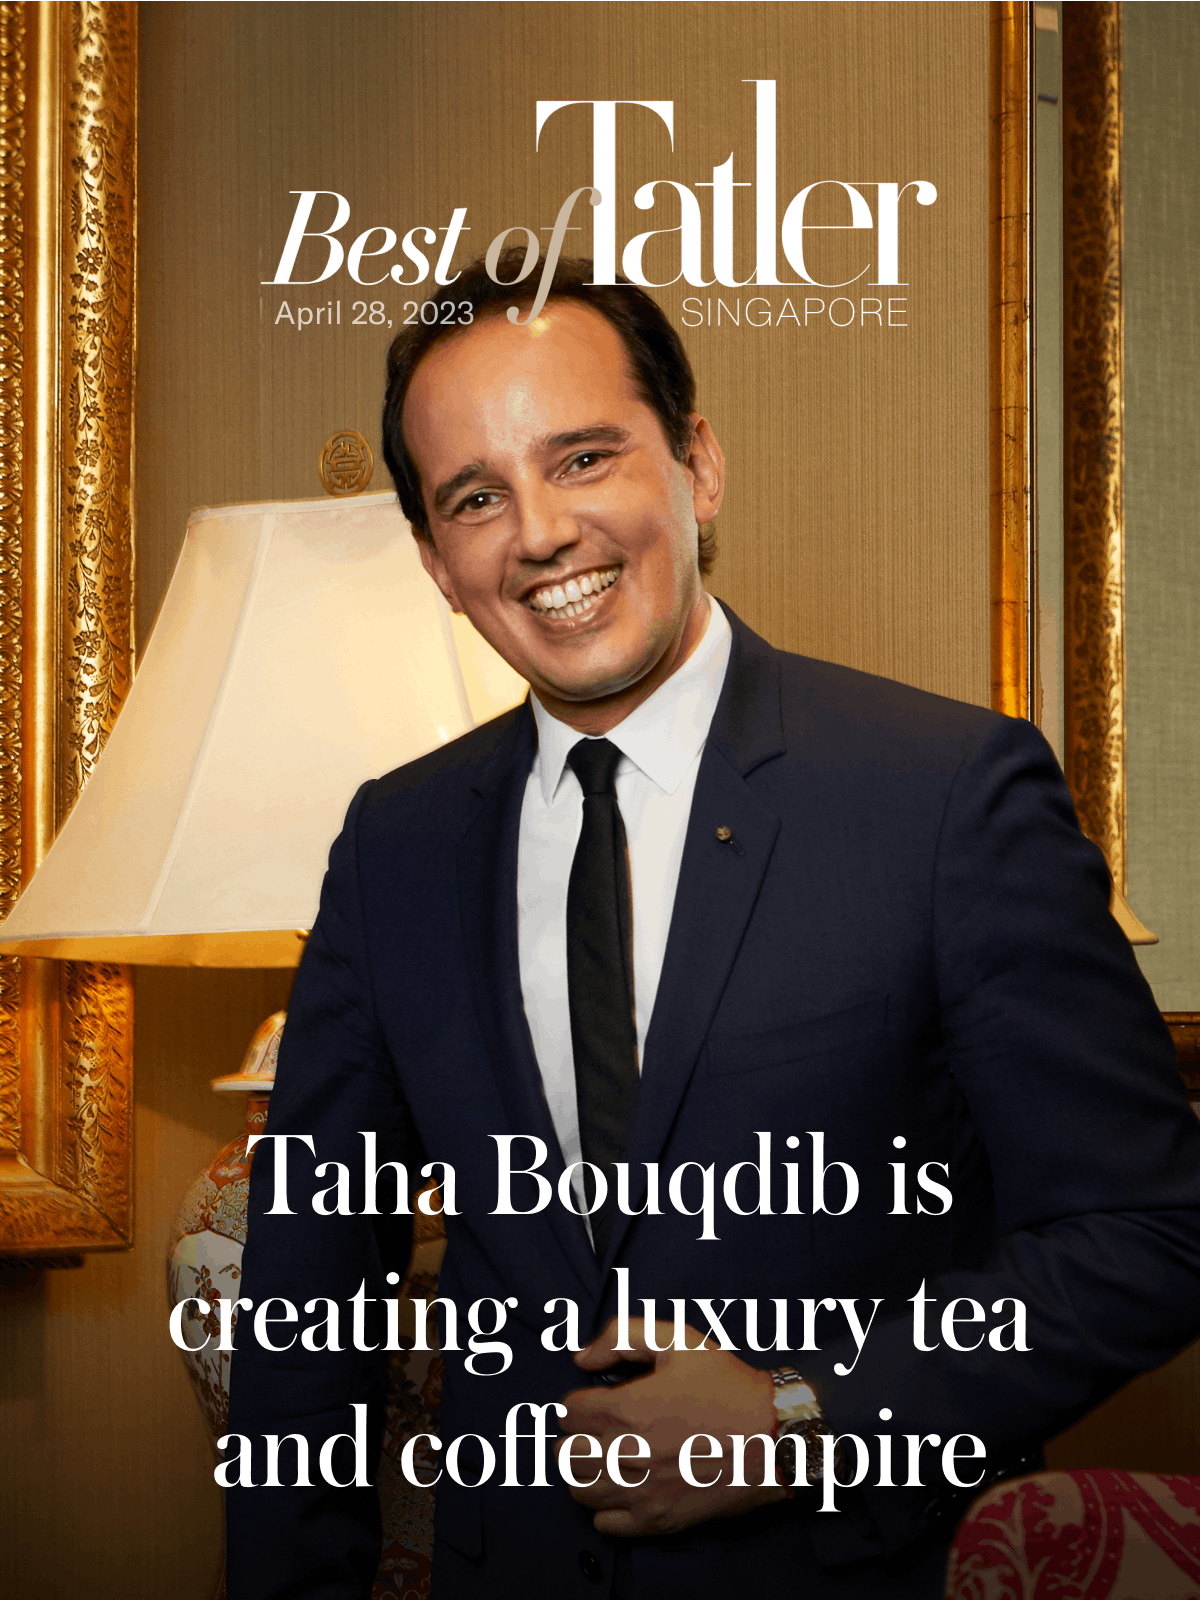 Best of Tatler Singapore: Taha Bouqdib is creating a luxury beverage empire  with TWG Tea and Bacha Coffee